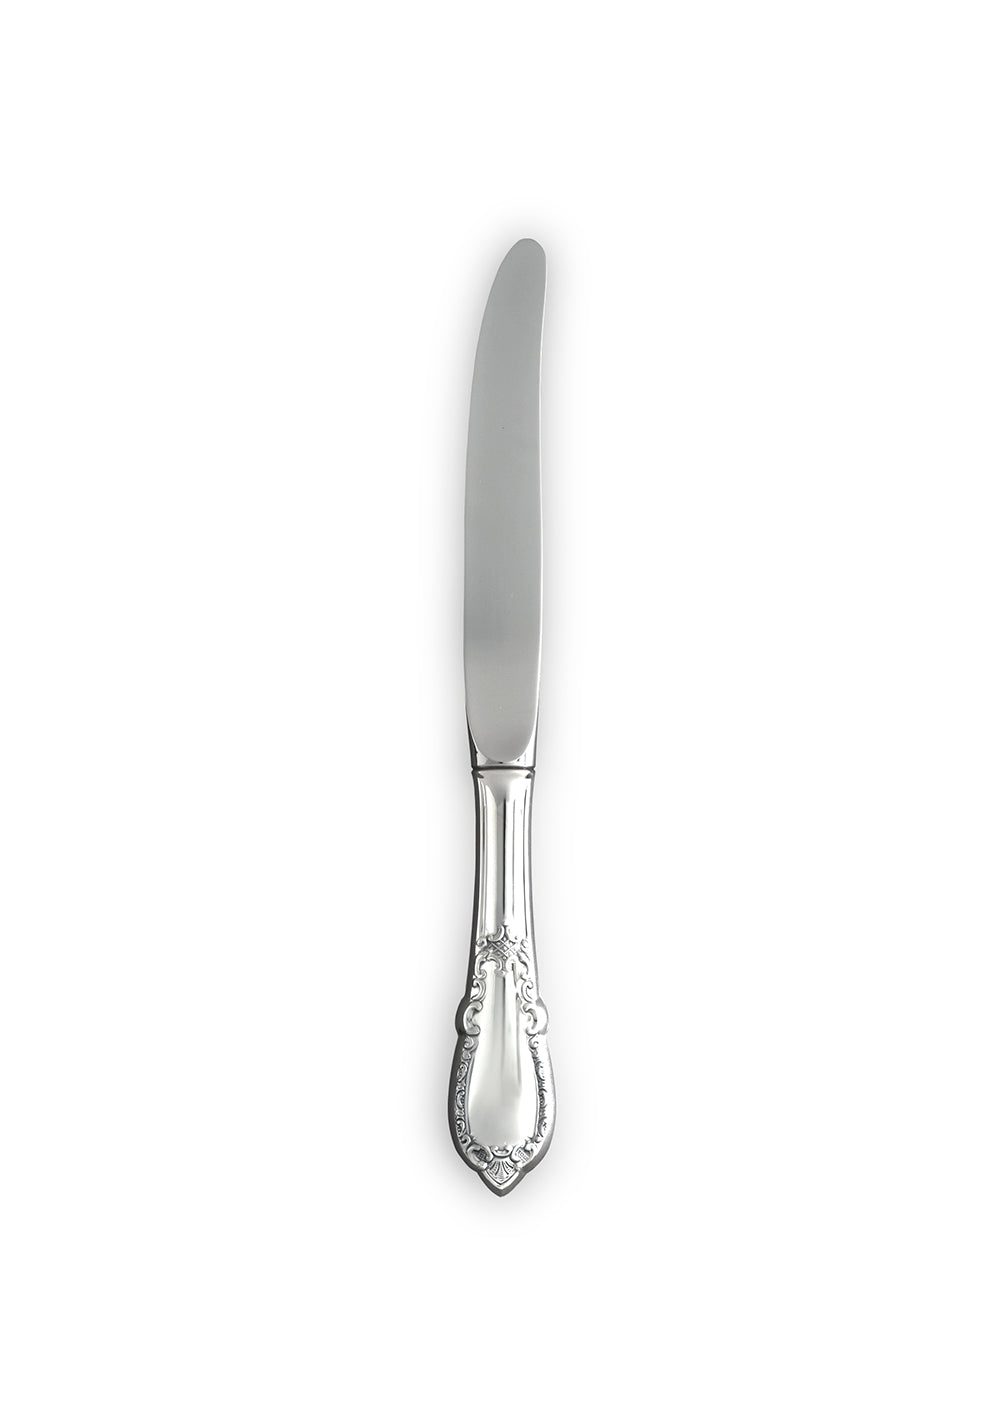 Noble small dining knife with a short handle